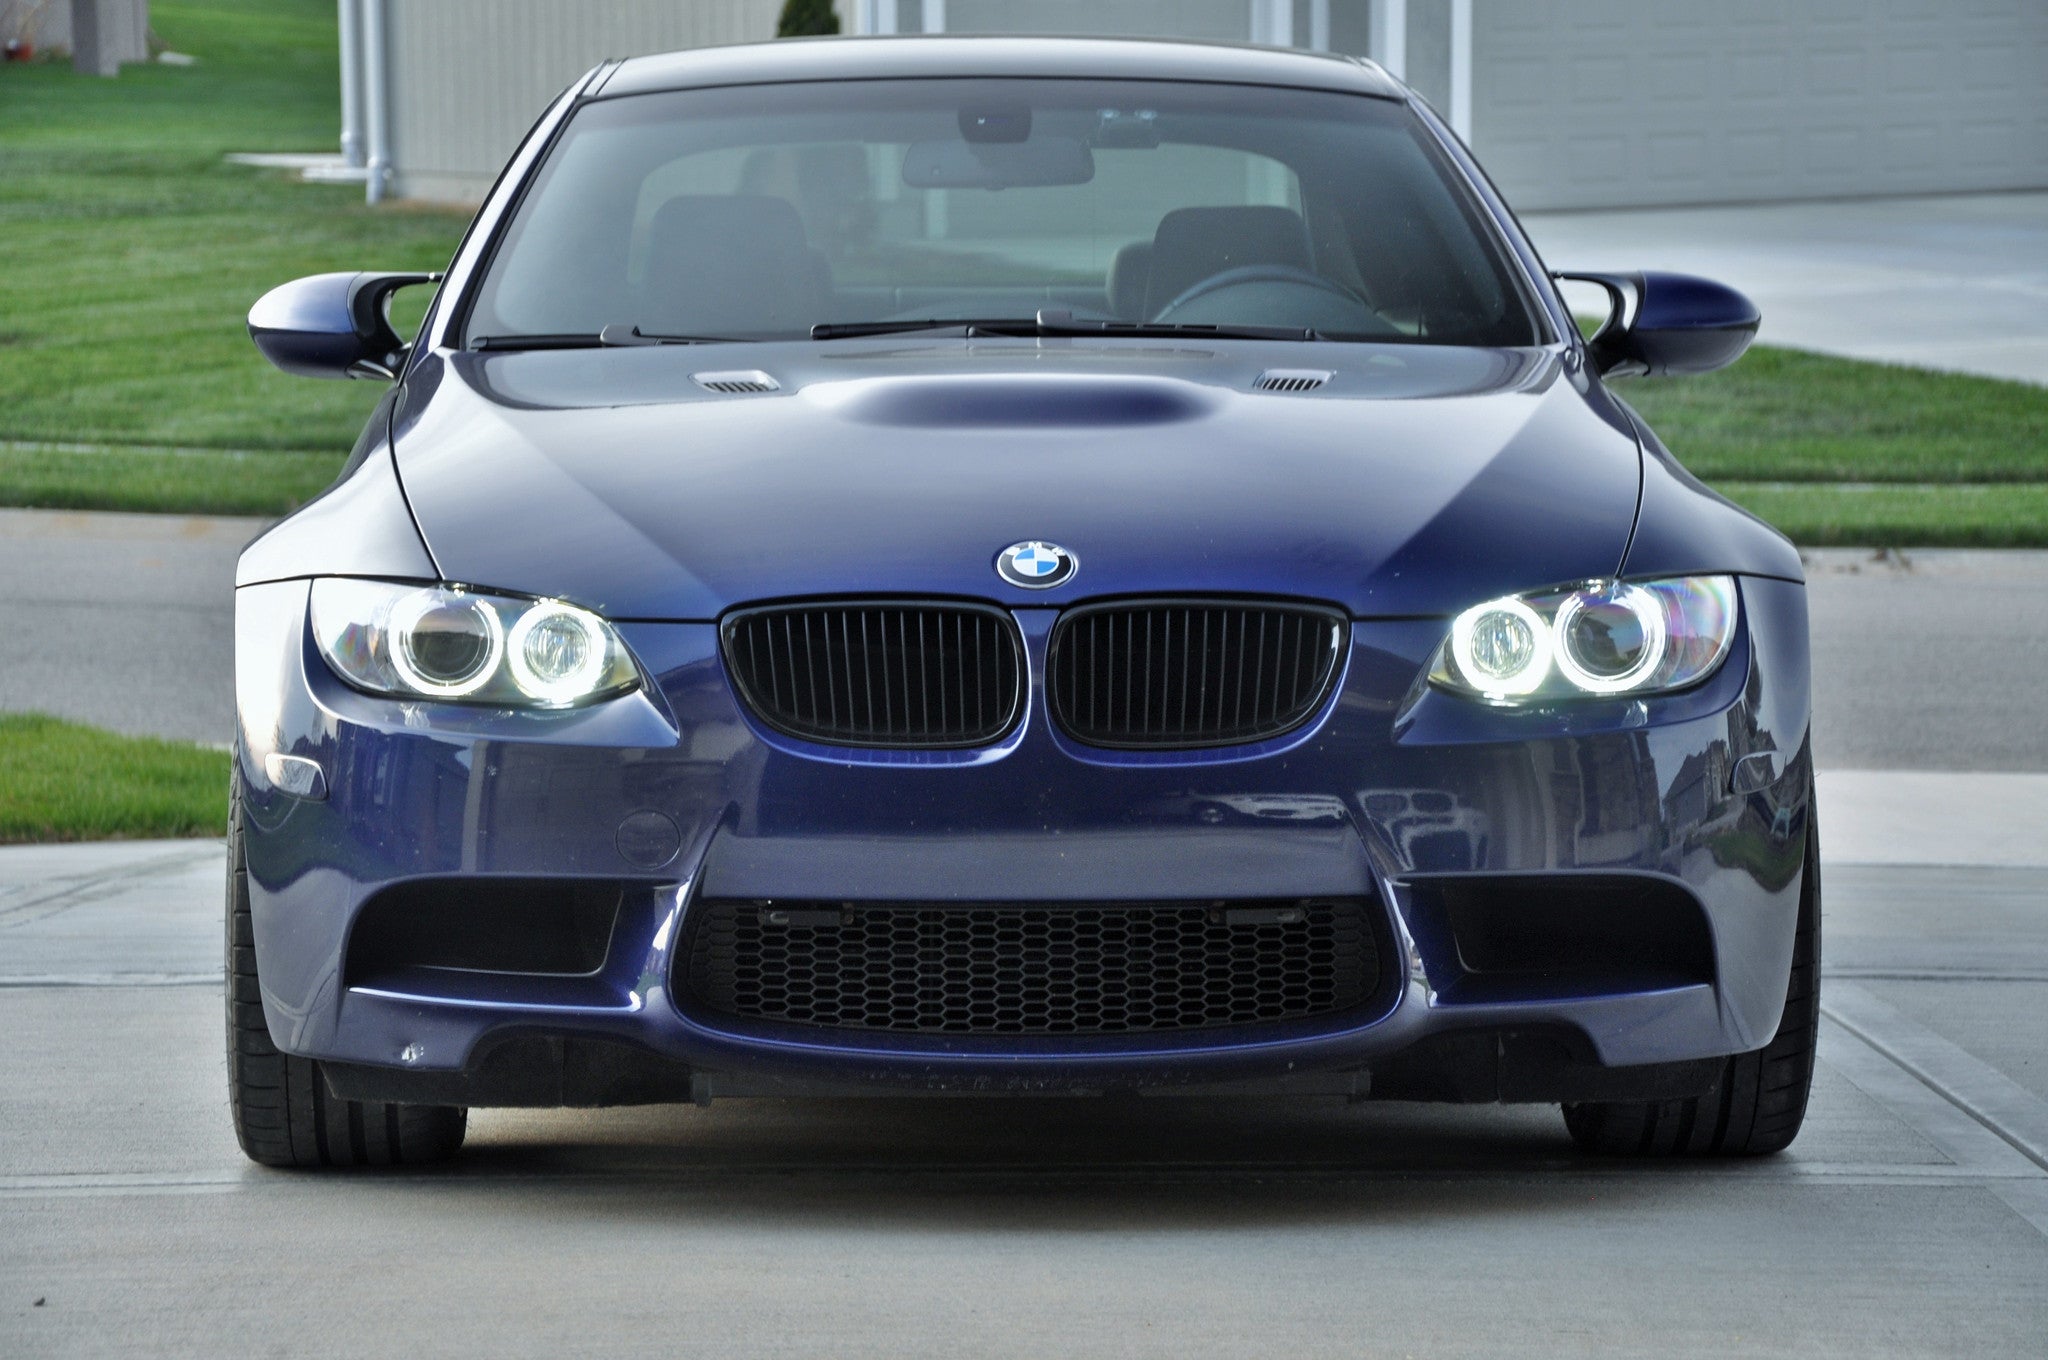 Lux H8 189 for BMW Angel Eyes